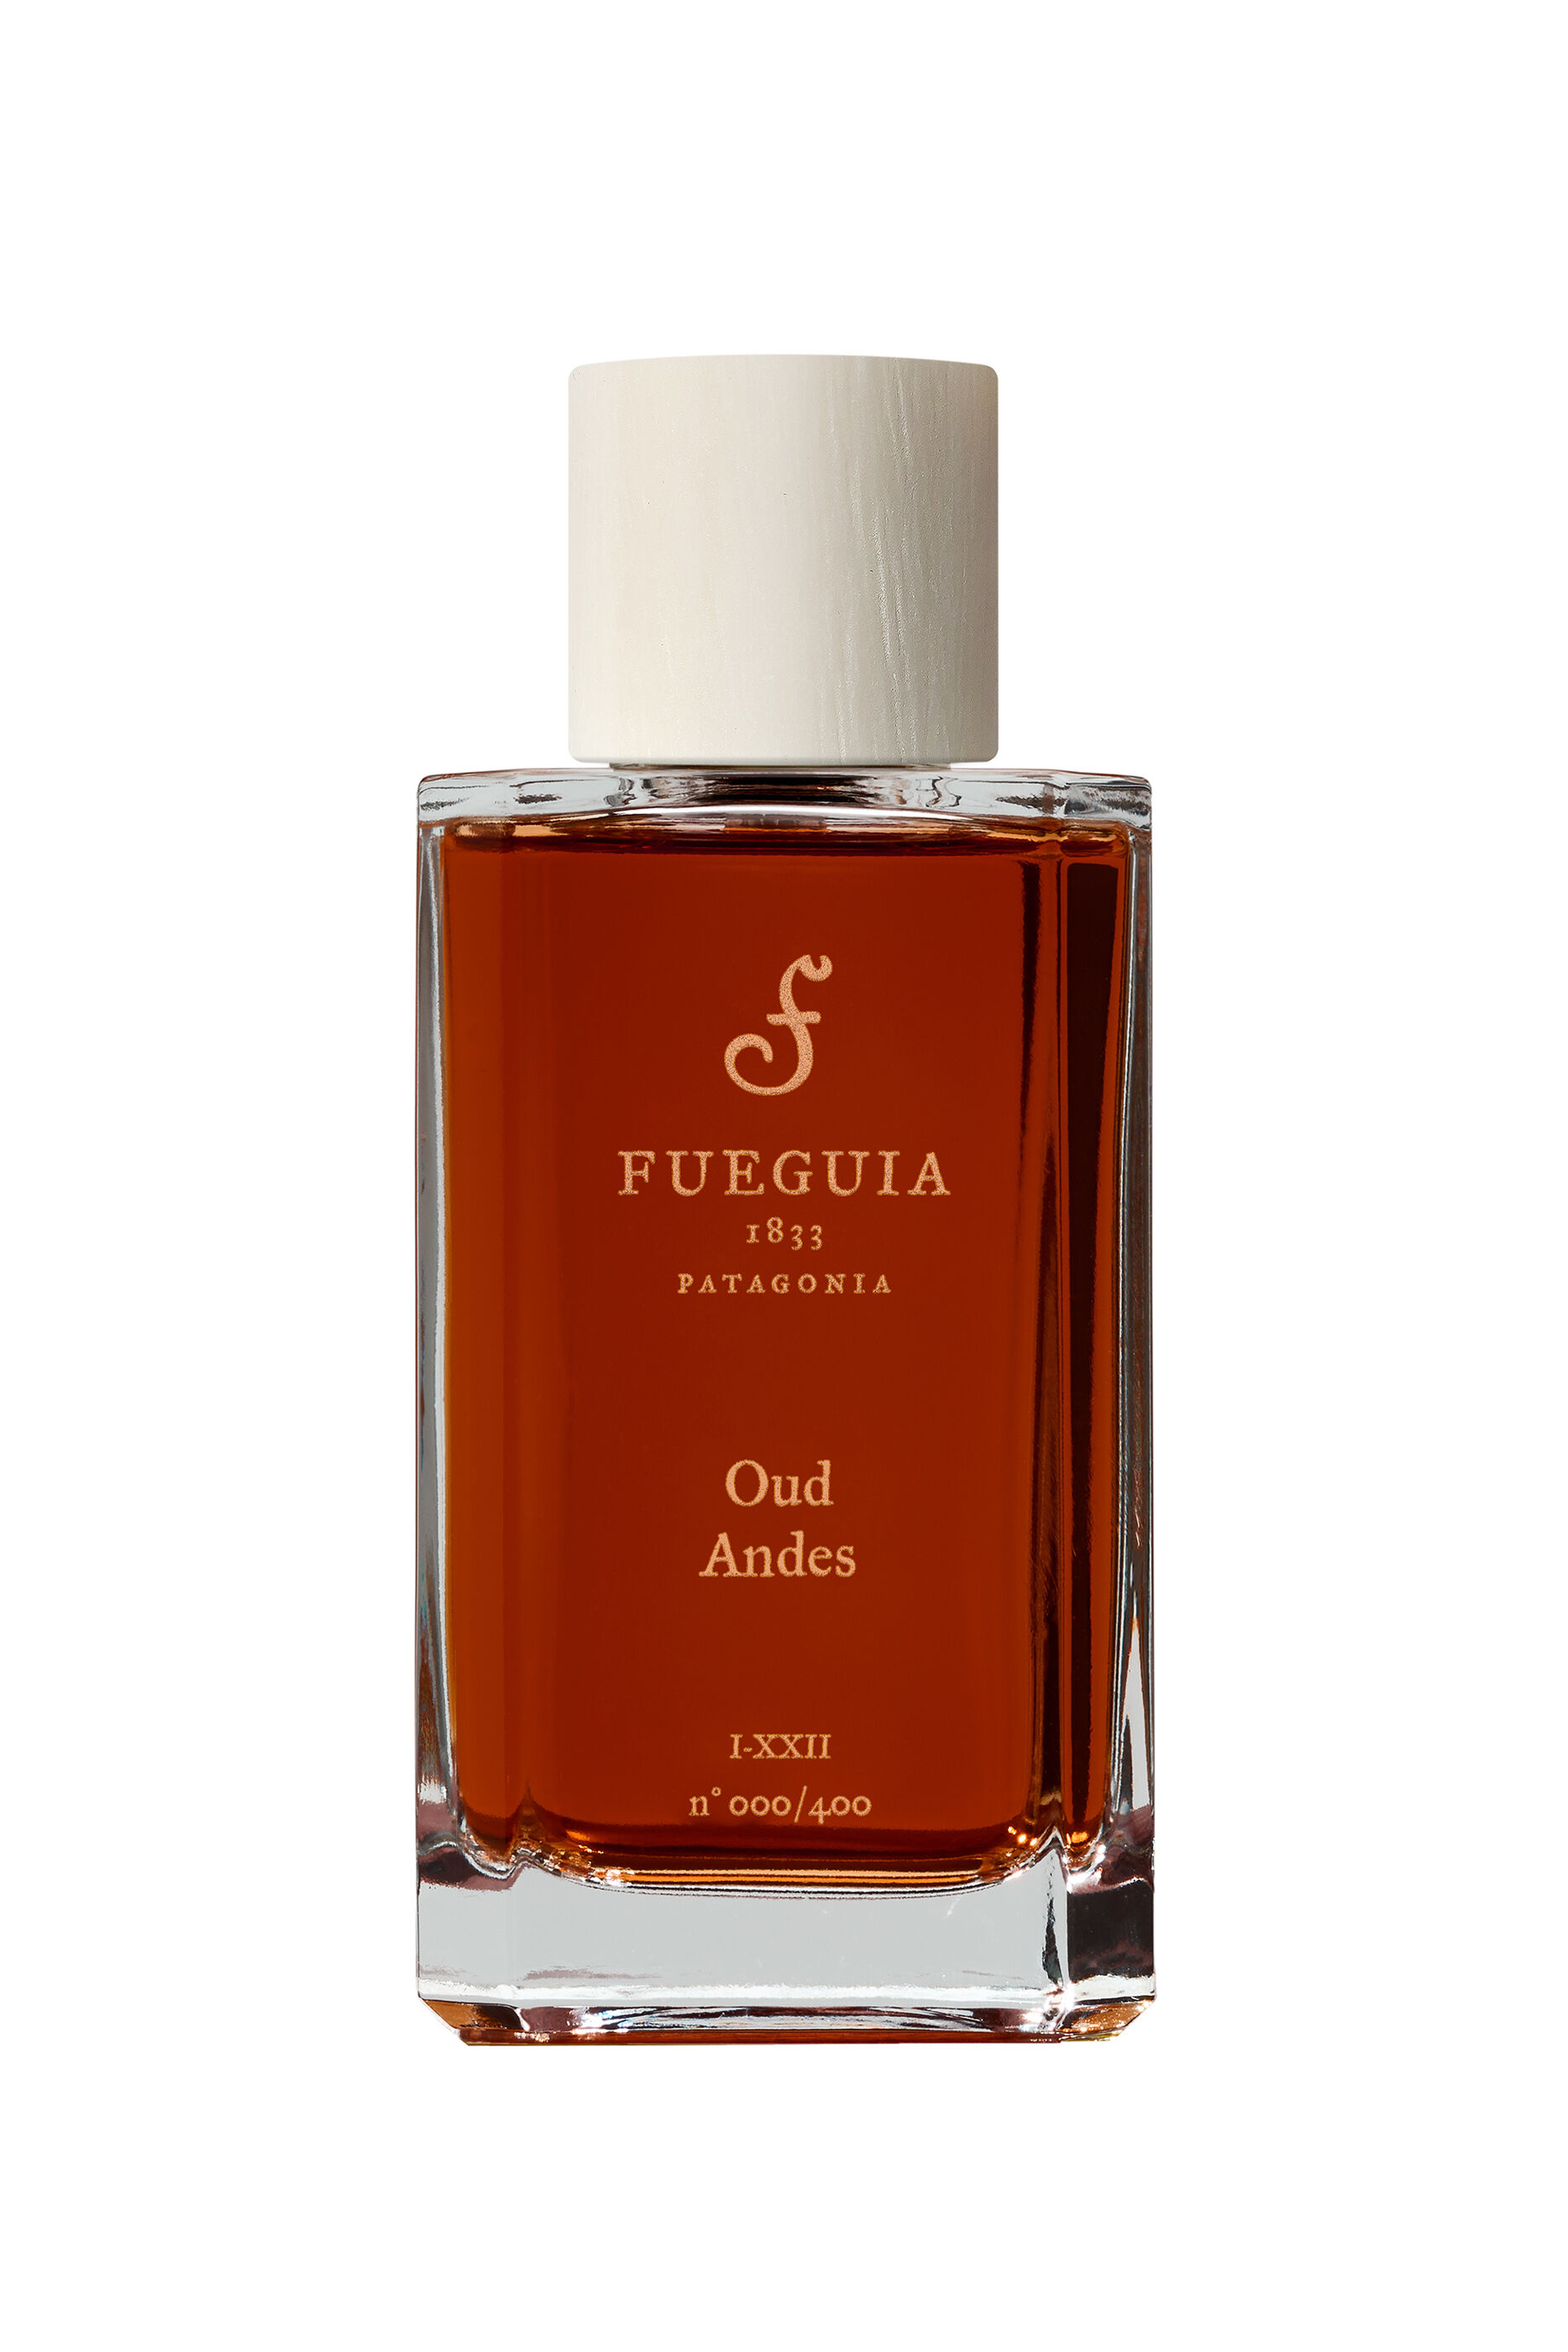 Buy Fueguia 1833 FUG Perf 100ml Oud Andes for Unisex